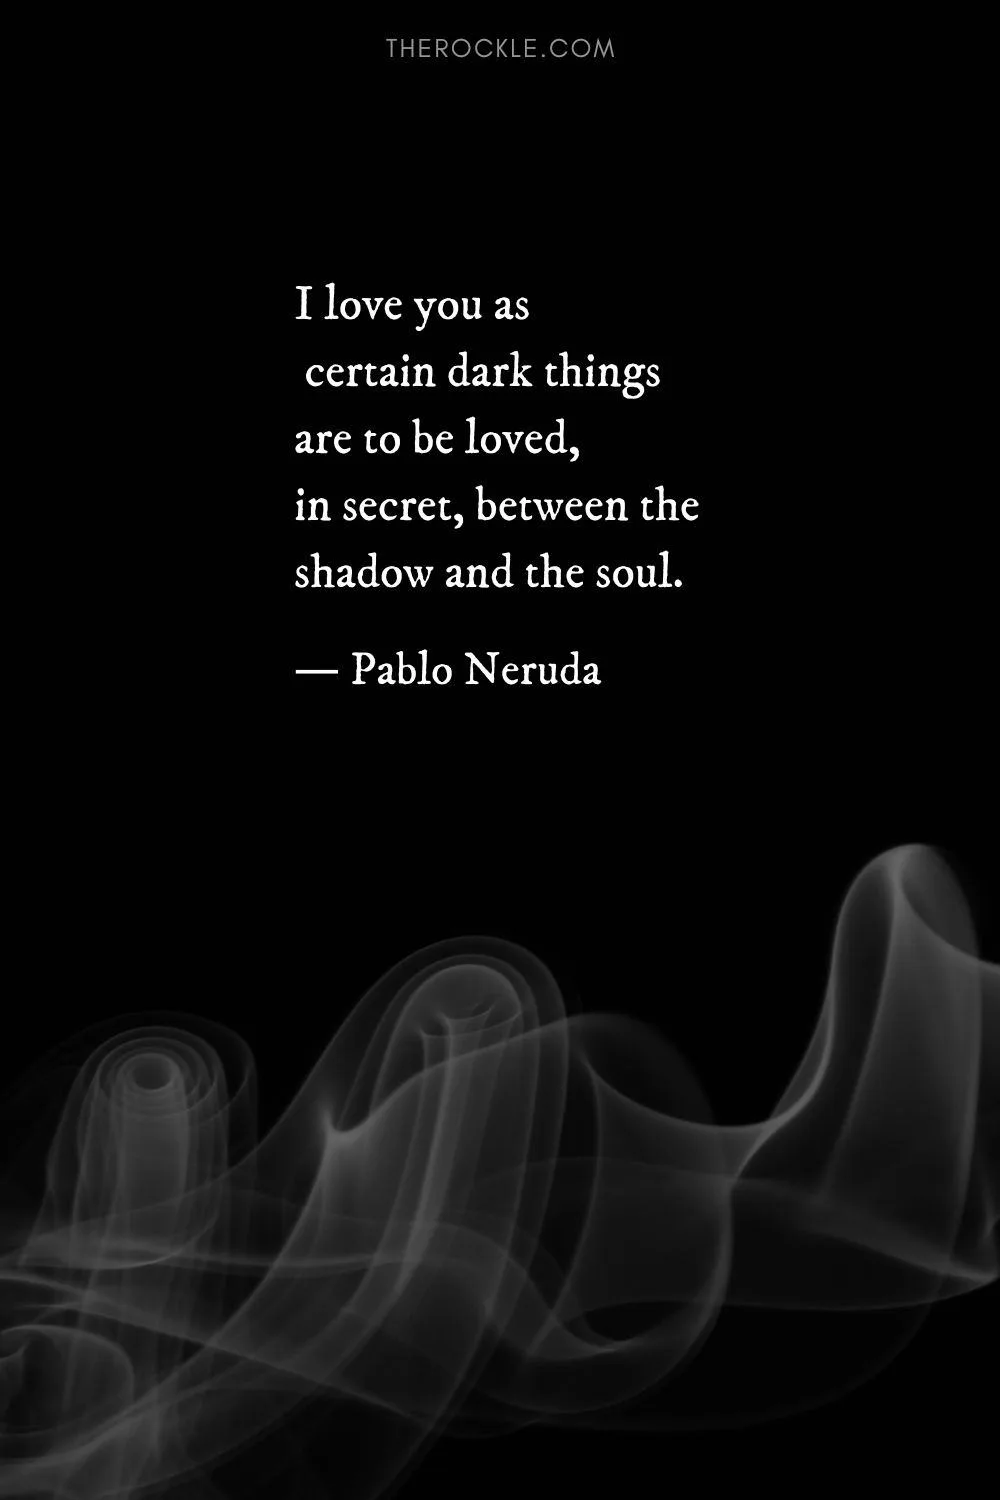 Pablo Neruda quote: “I love you as certain dark things are to be loved, in secret, between the shadow and the soul.”